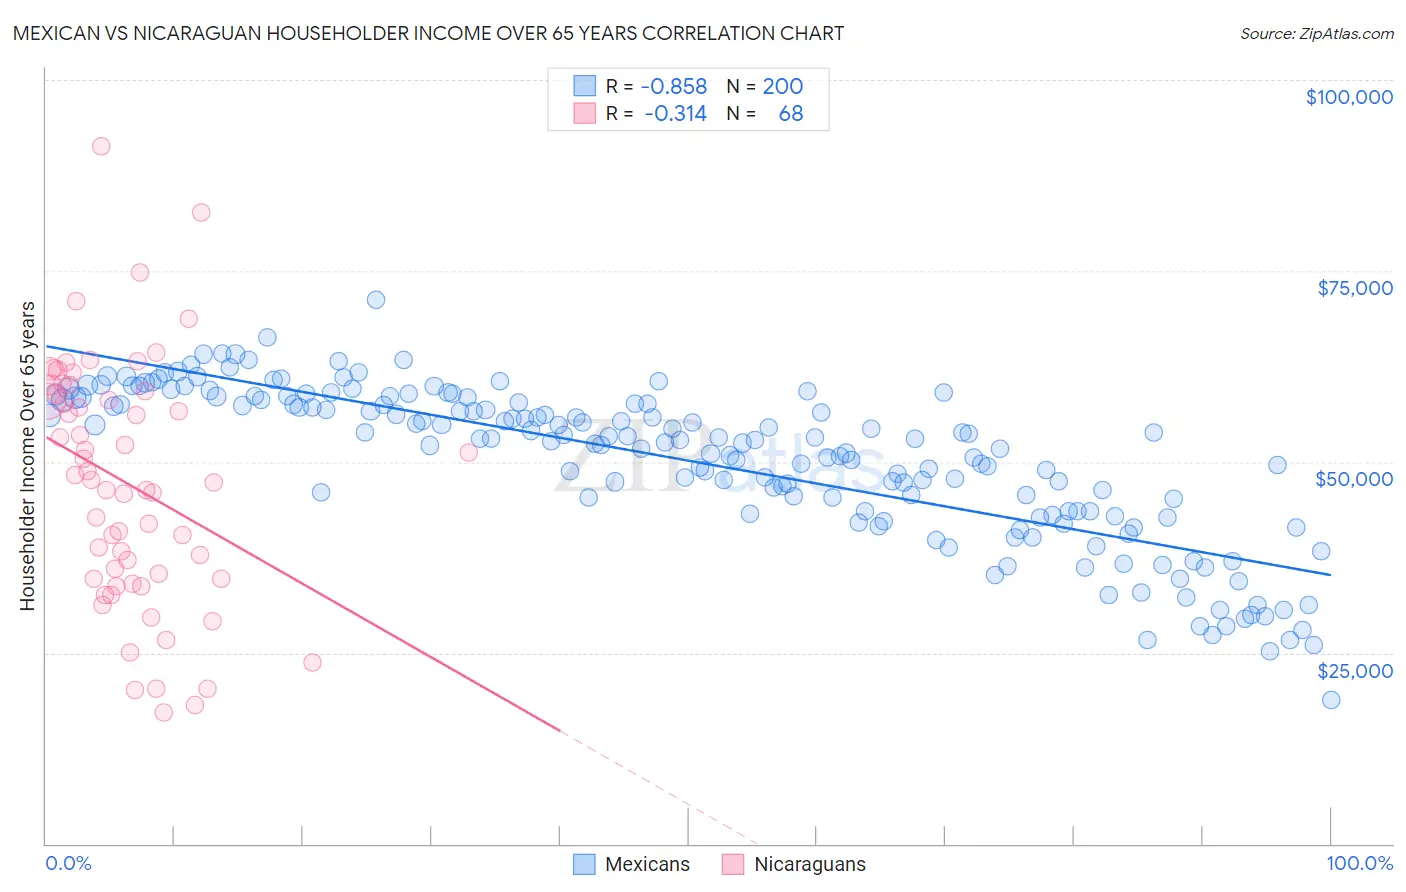 Mexican vs Nicaraguan Householder Income Over 65 years